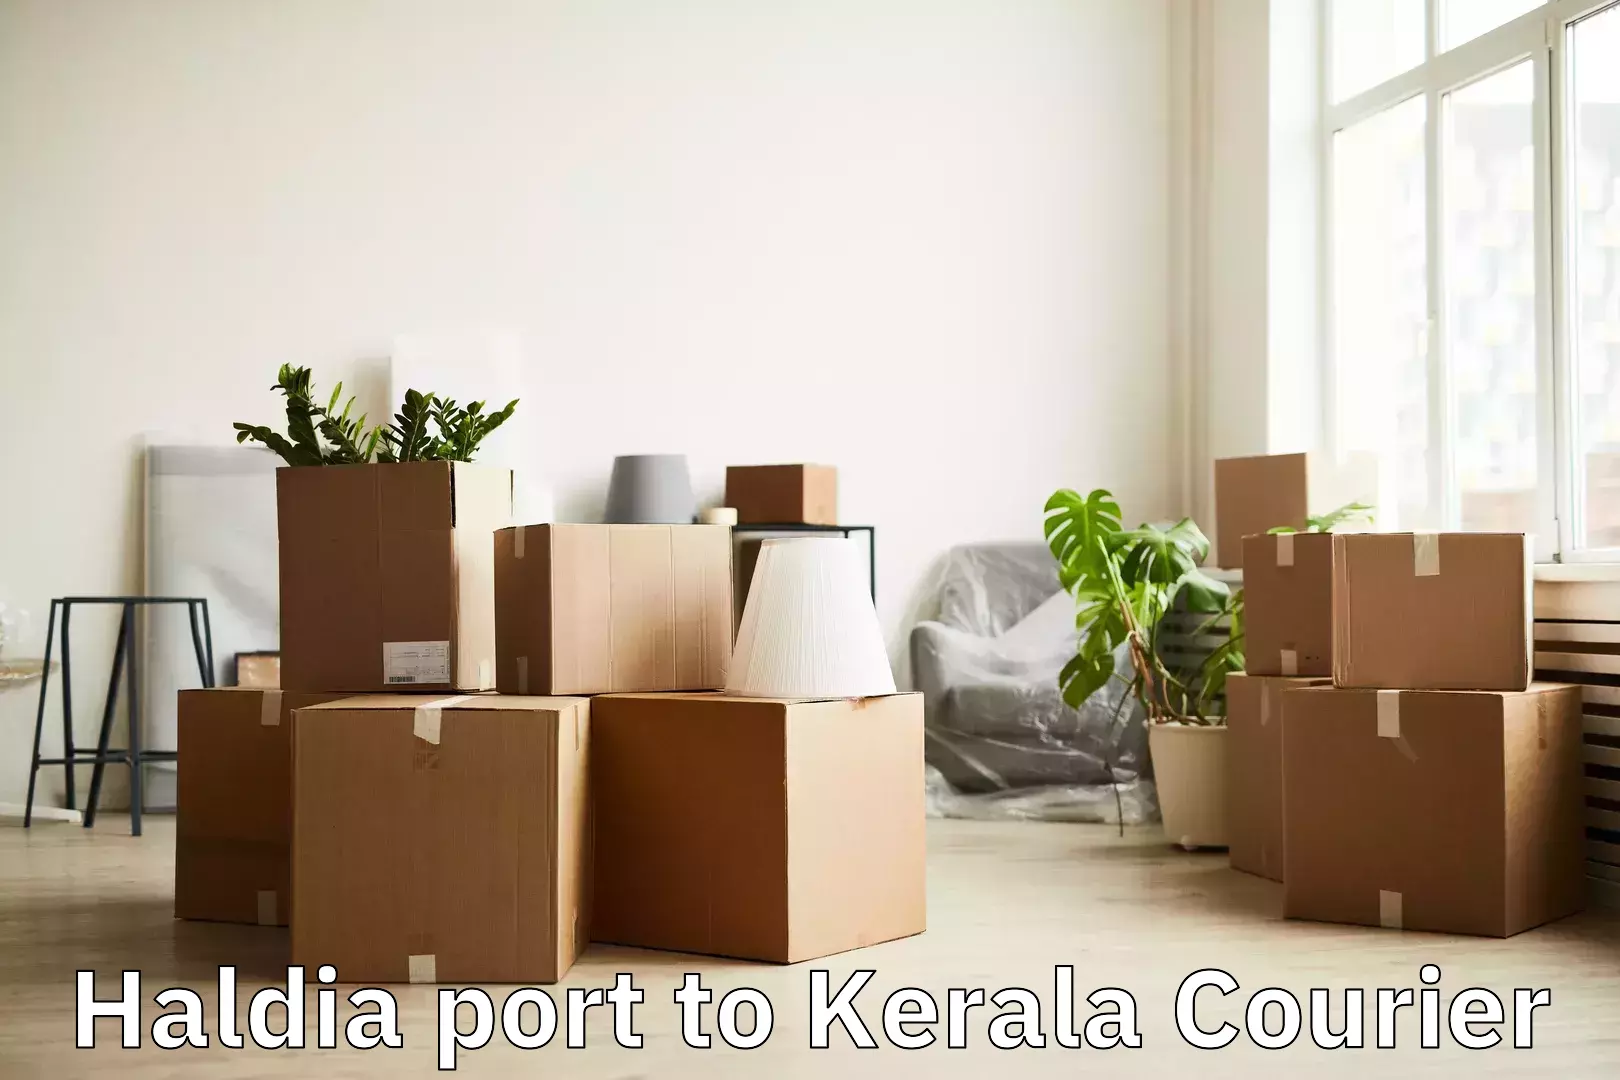 Tailored baggage transport in Haldia port to Parappa